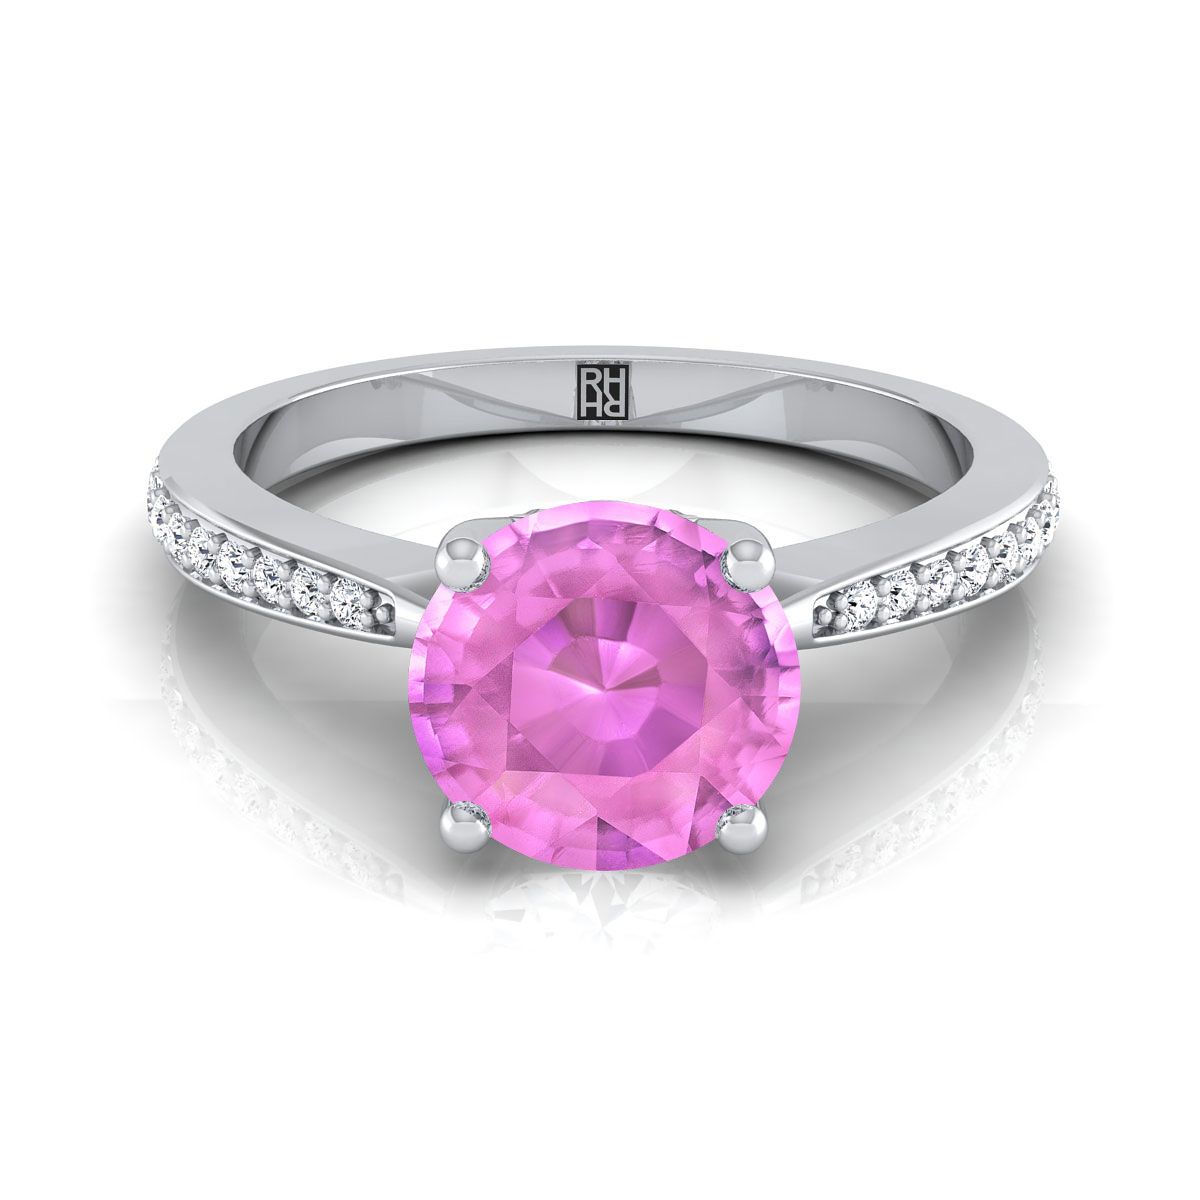 18K White Gold Round Brilliant Pink Sapphire Tapered Pave Diamond Engagement Ring -1/8ctw